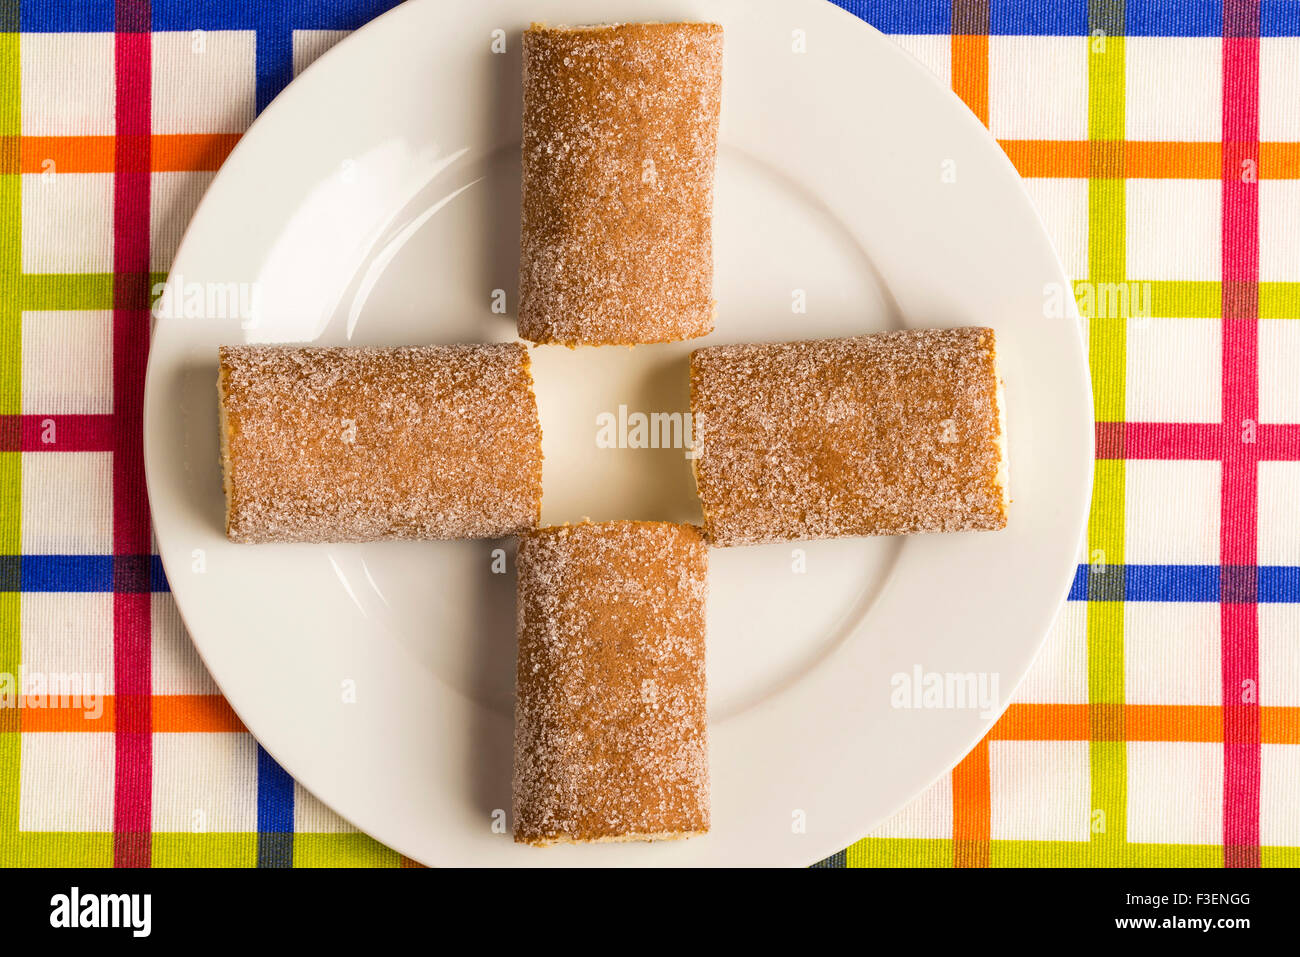 Four cakes filled with cream and rolled forming a cross on a colorful striped tablecloth Stock Photo